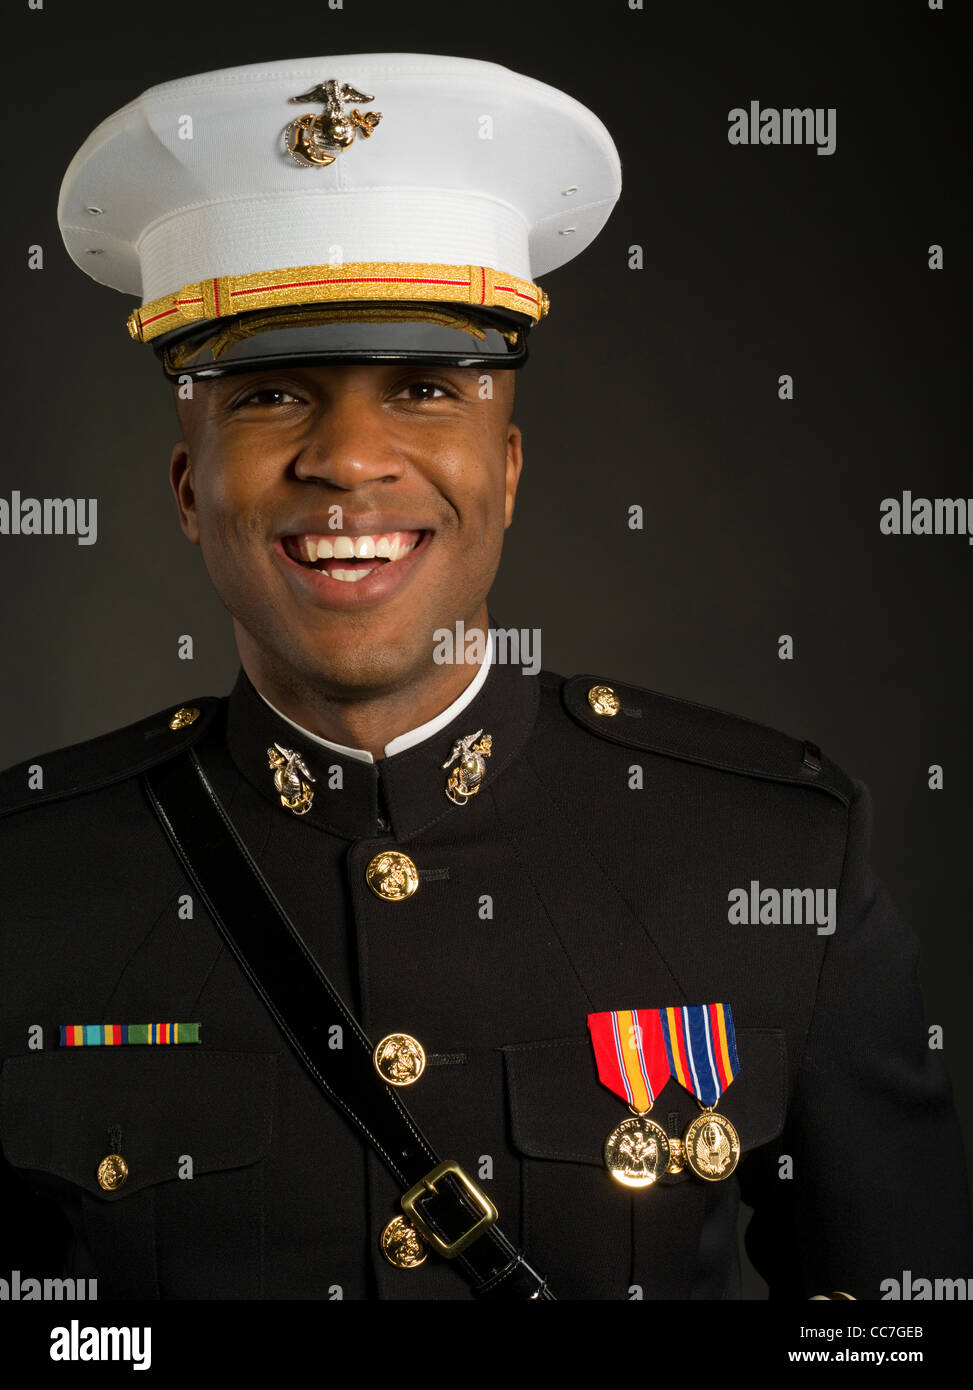 United States Marine Corps Officer In Blue Dress A Uniform Including CC7GEB 